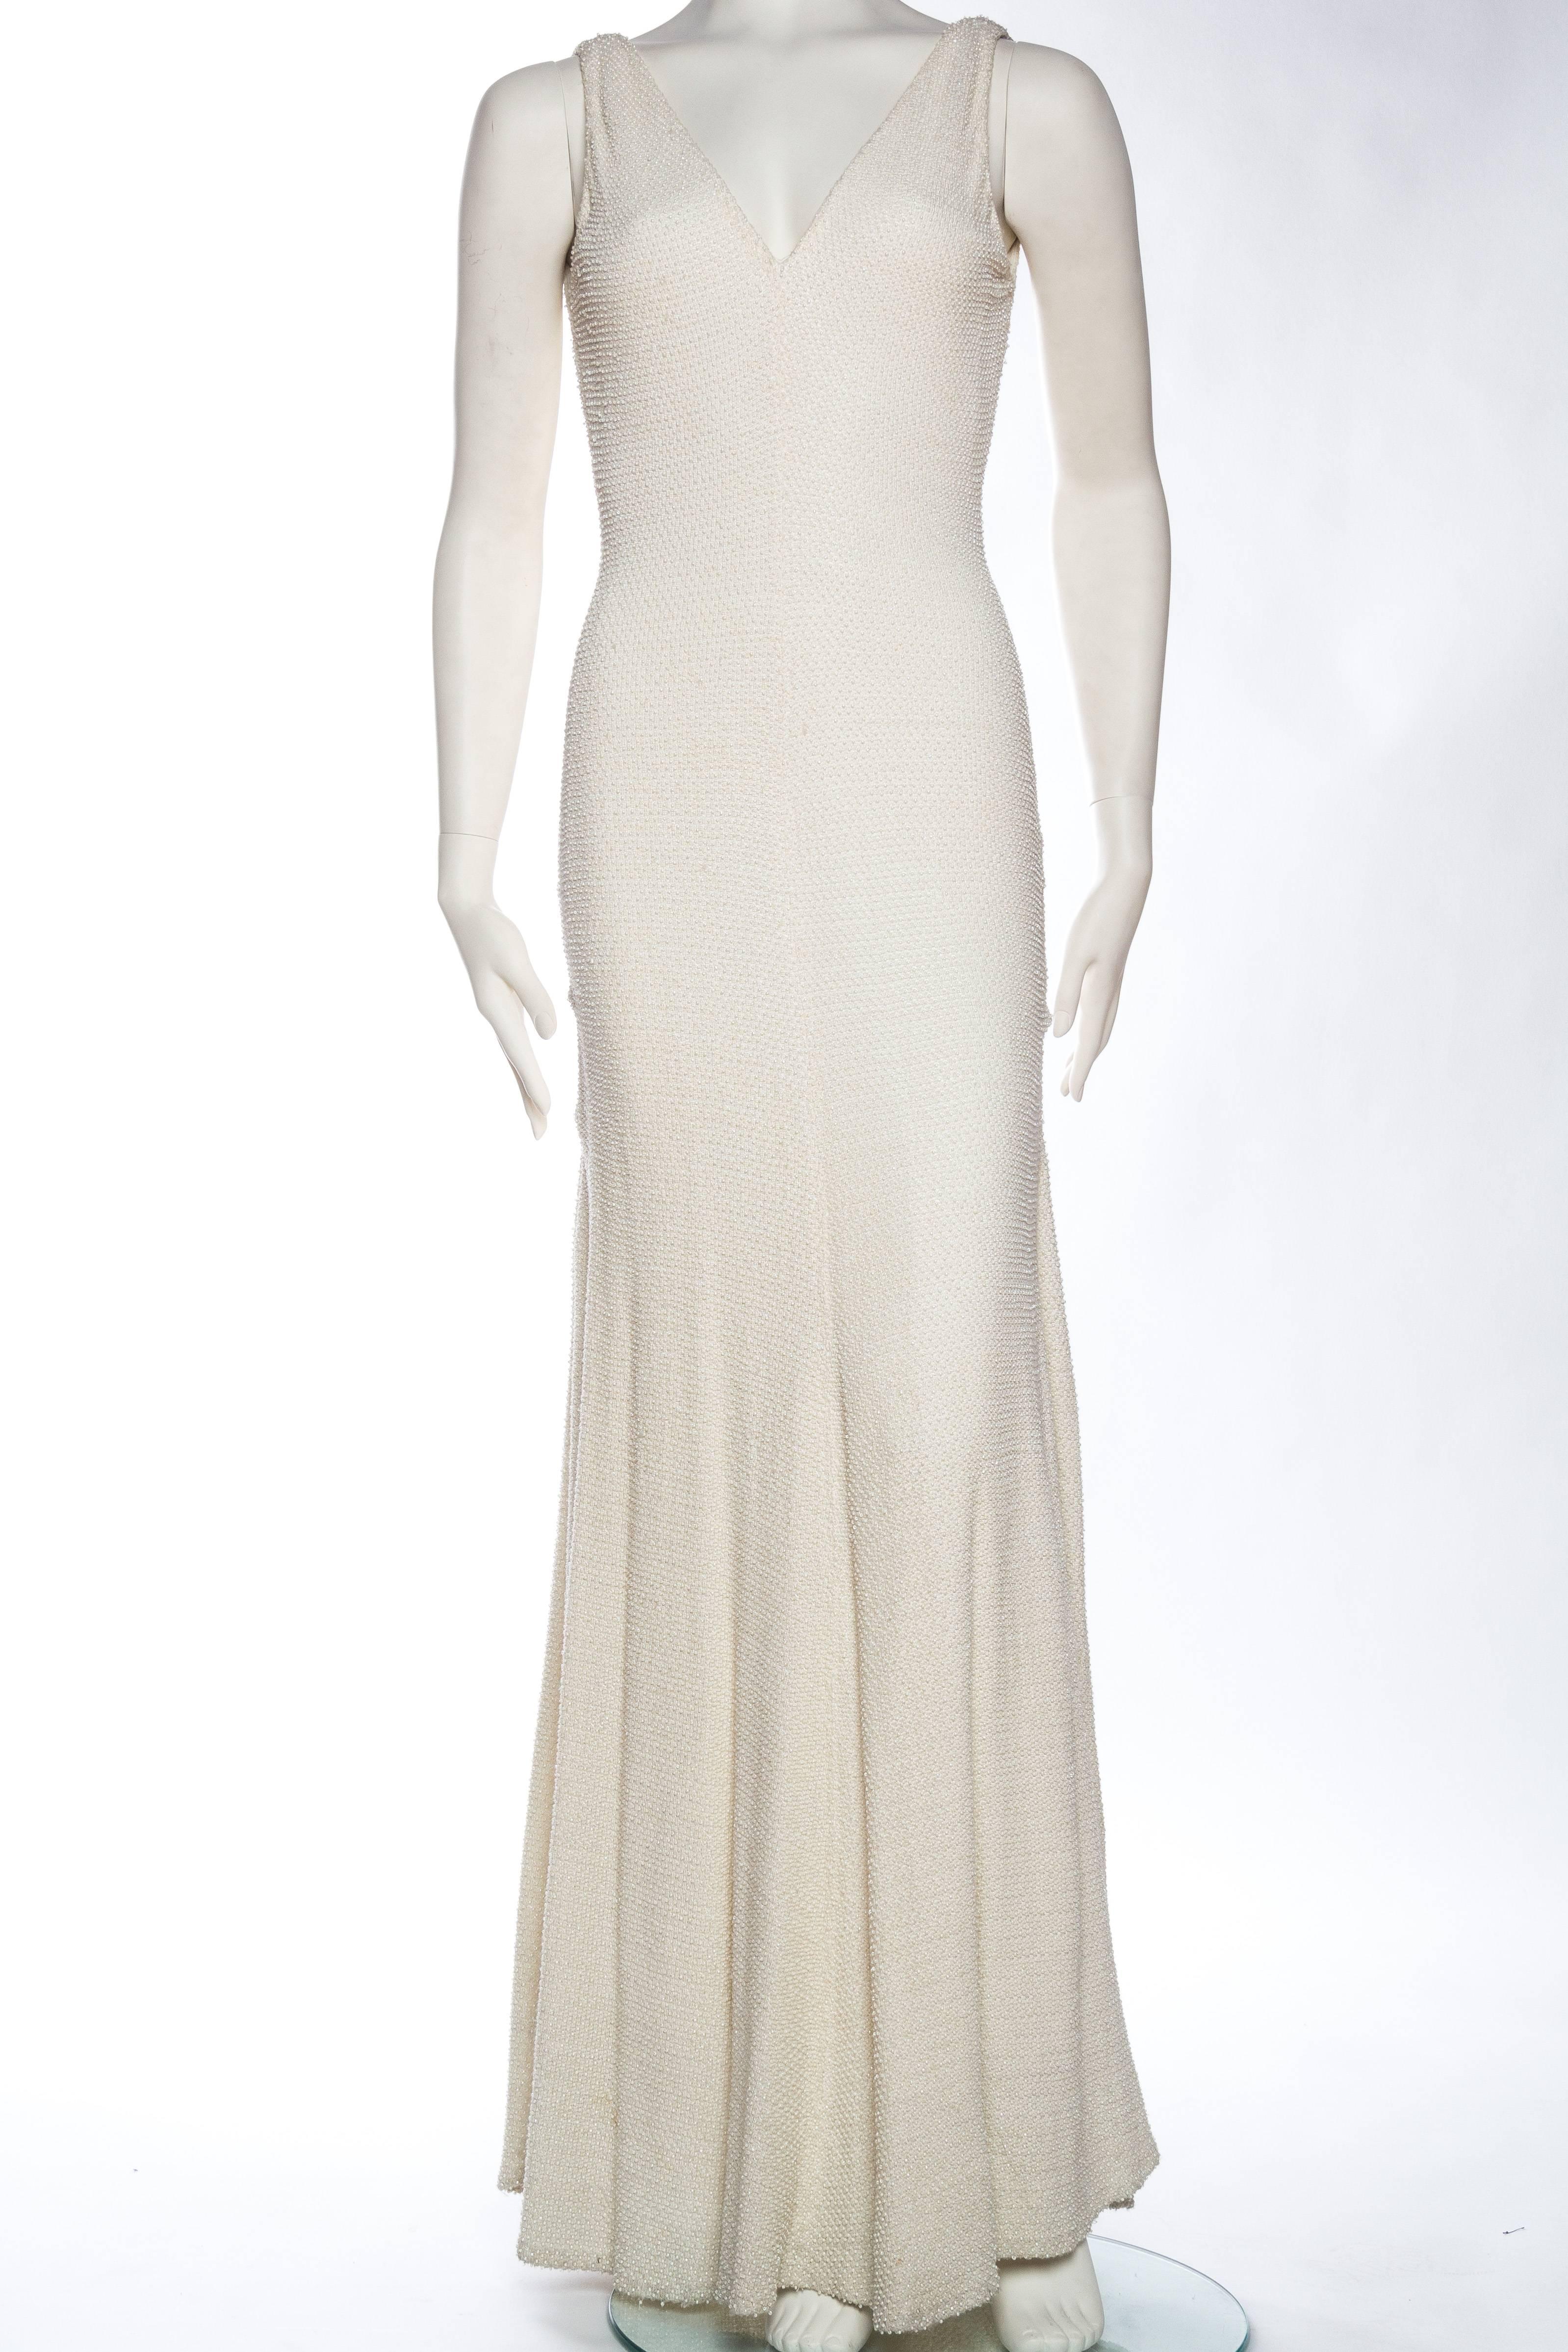 Slinky Beaded Backless Carmen Marc Valvo Gown  In Excellent Condition In New York, NY